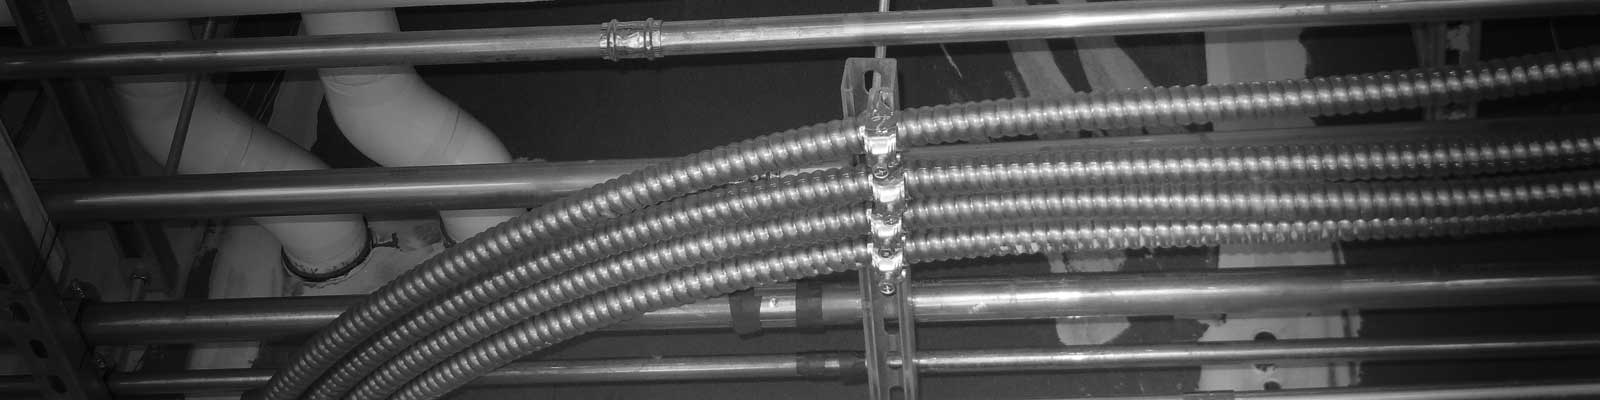 Metal-Clad Armored Cable Vs. Traditional Electrical Cable and Conduit